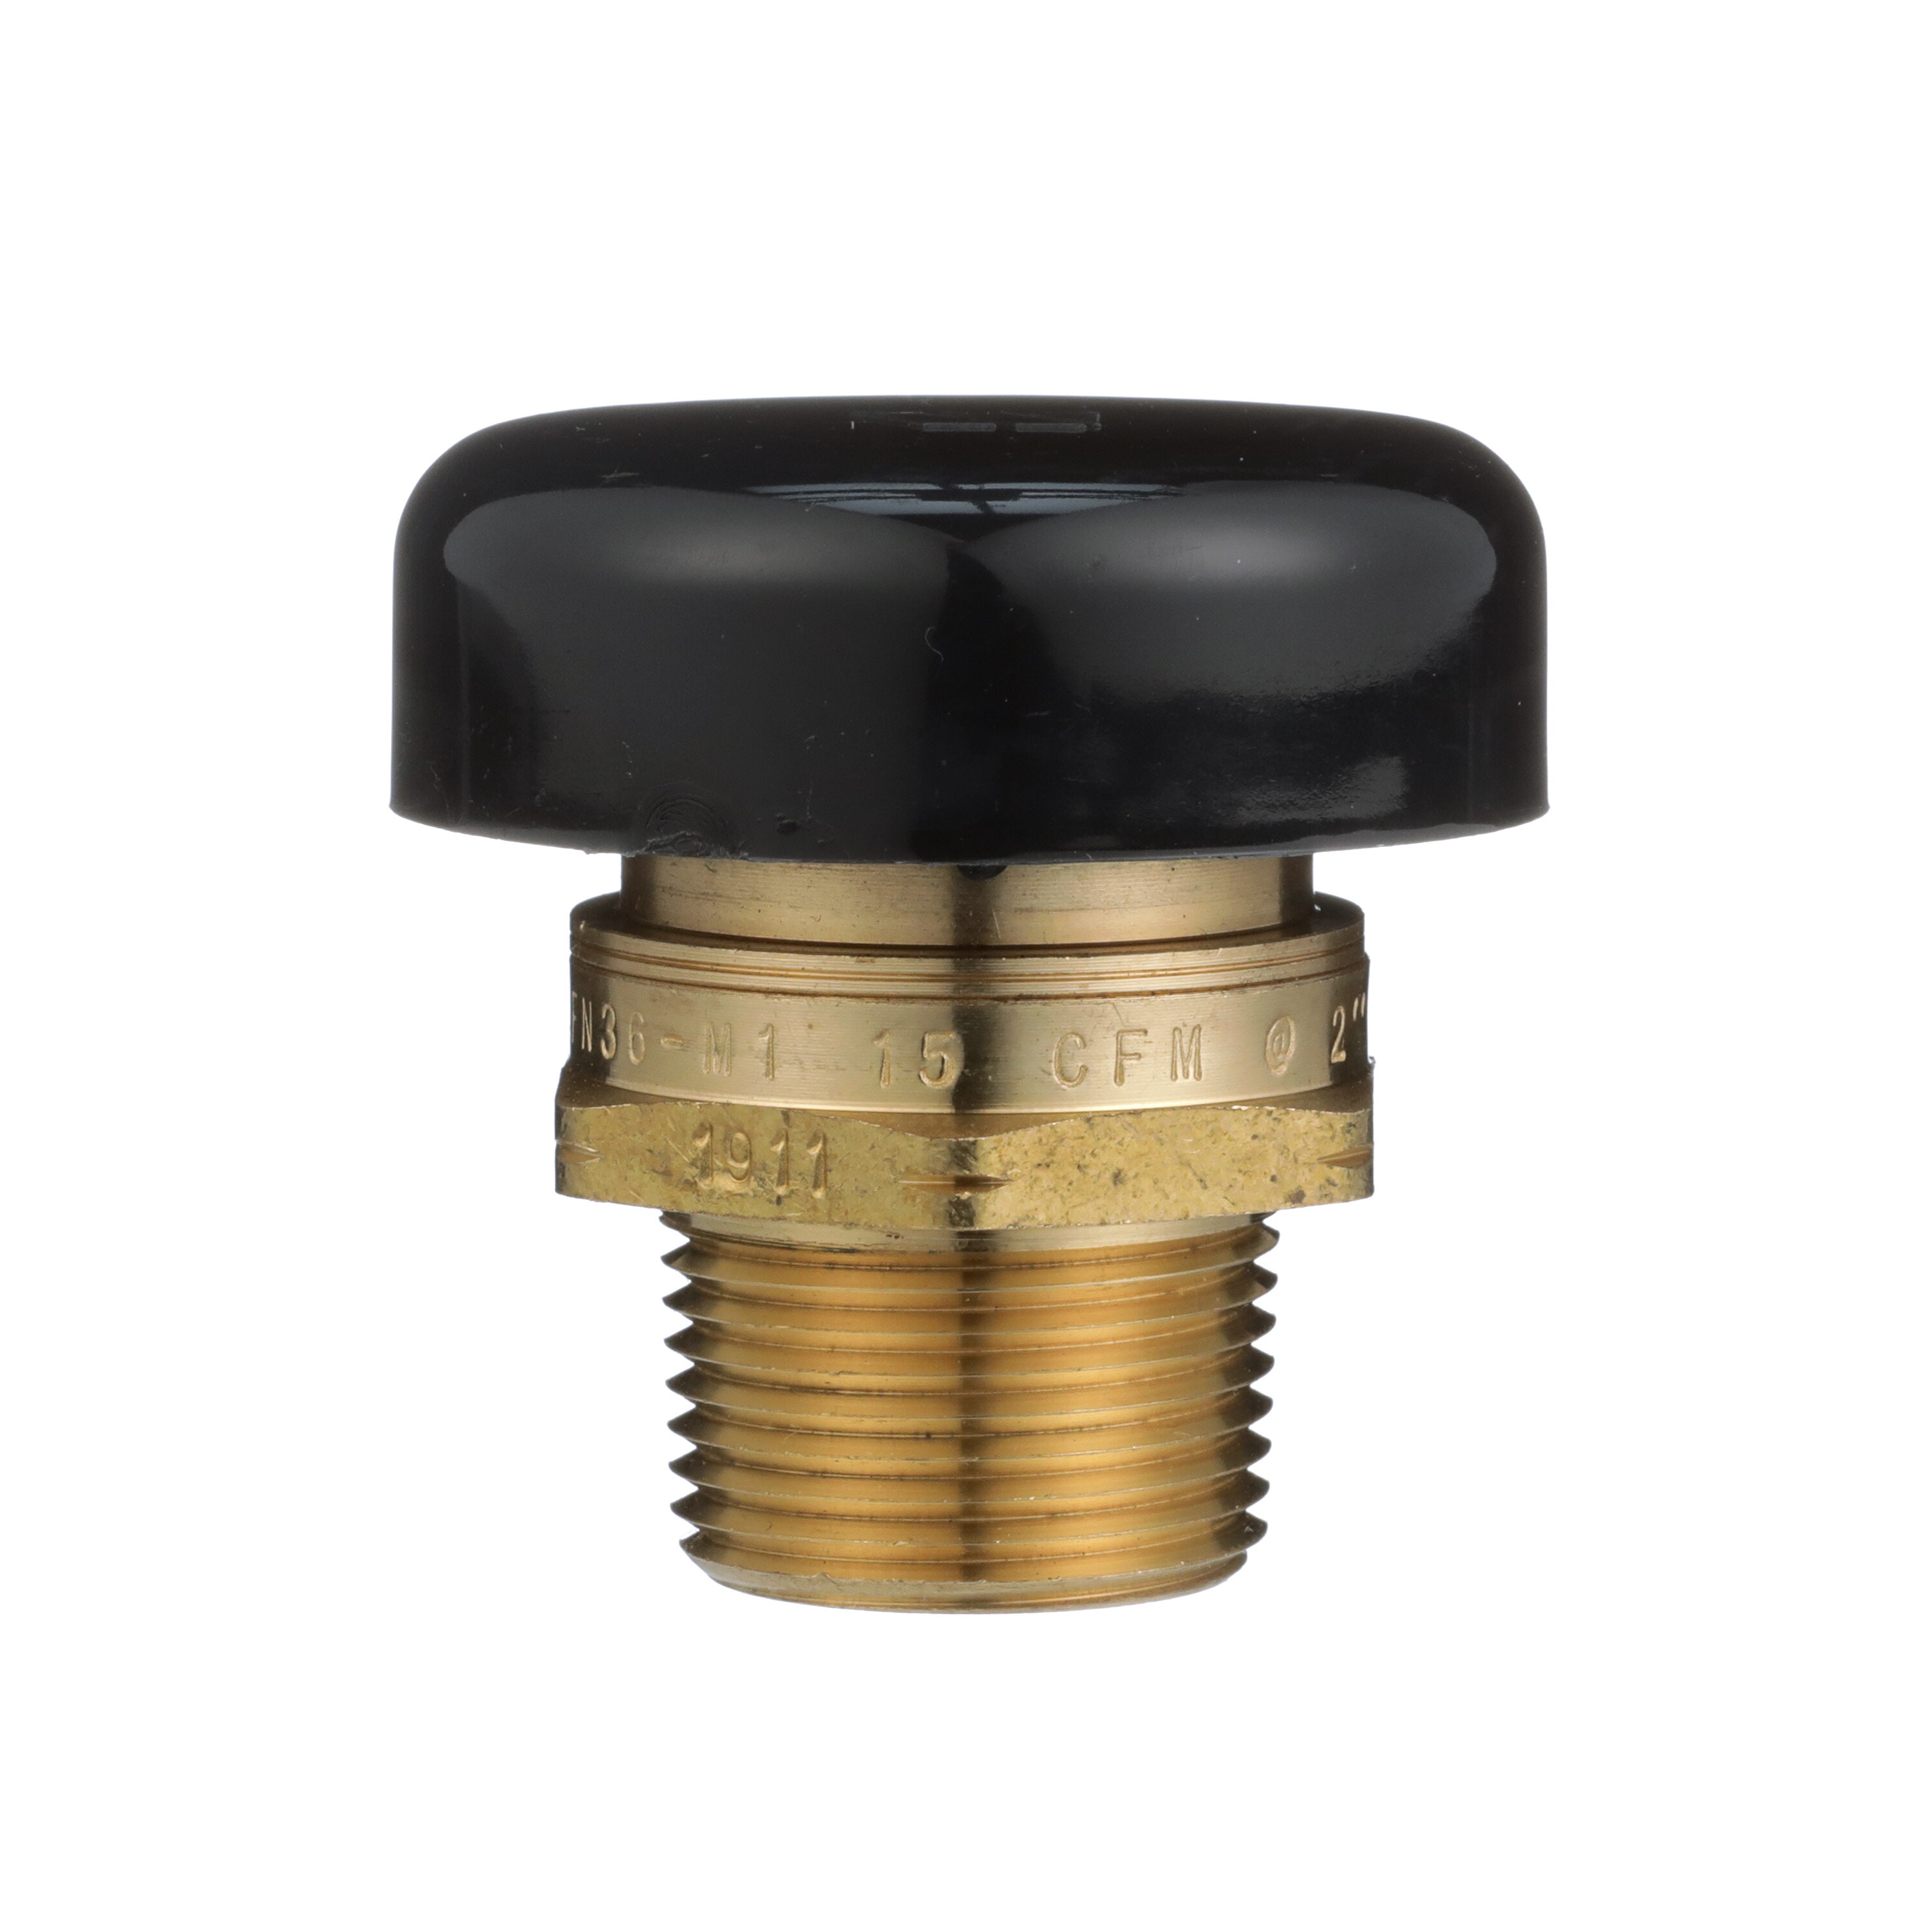 WATTS® 0556031 N36 Low Profile Vacuum Relief Valve, 3/4 in Nominal, MNPT End Style, 15 psi Pressure, 15 cfm Flow Rate, Brass Body